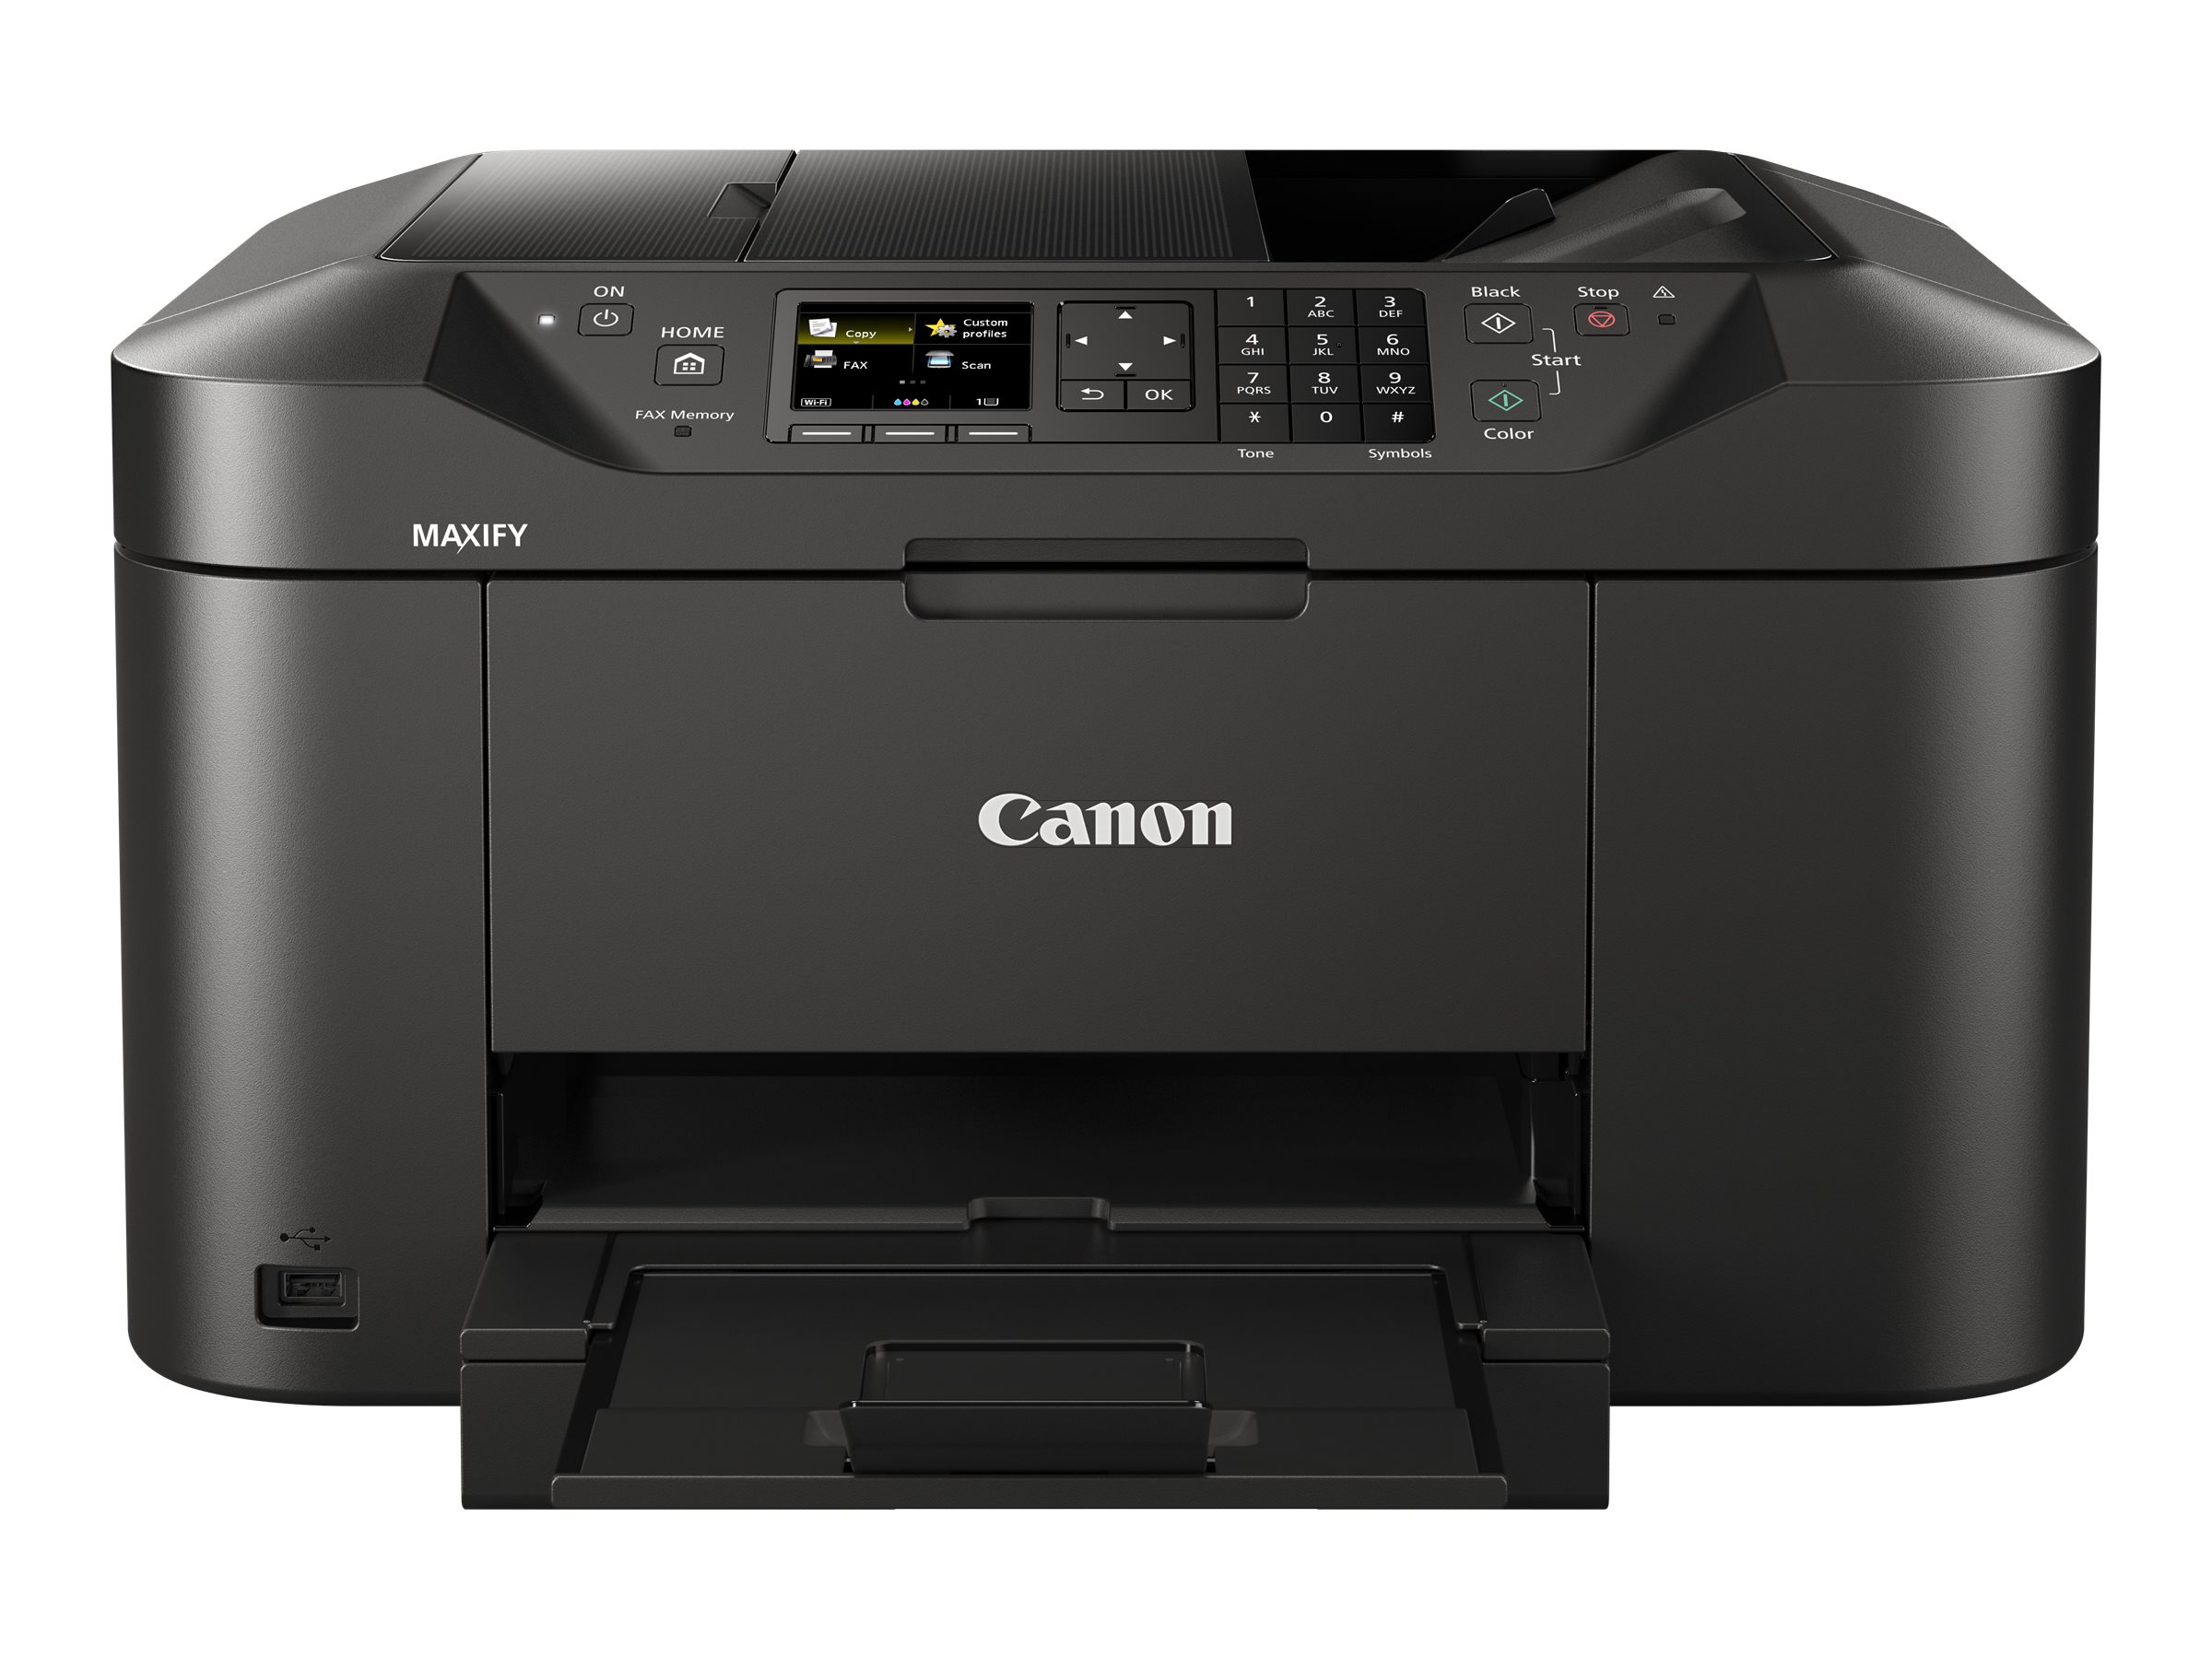 Canon Maxify MB2120 Small Office/Home All-in-One Printer